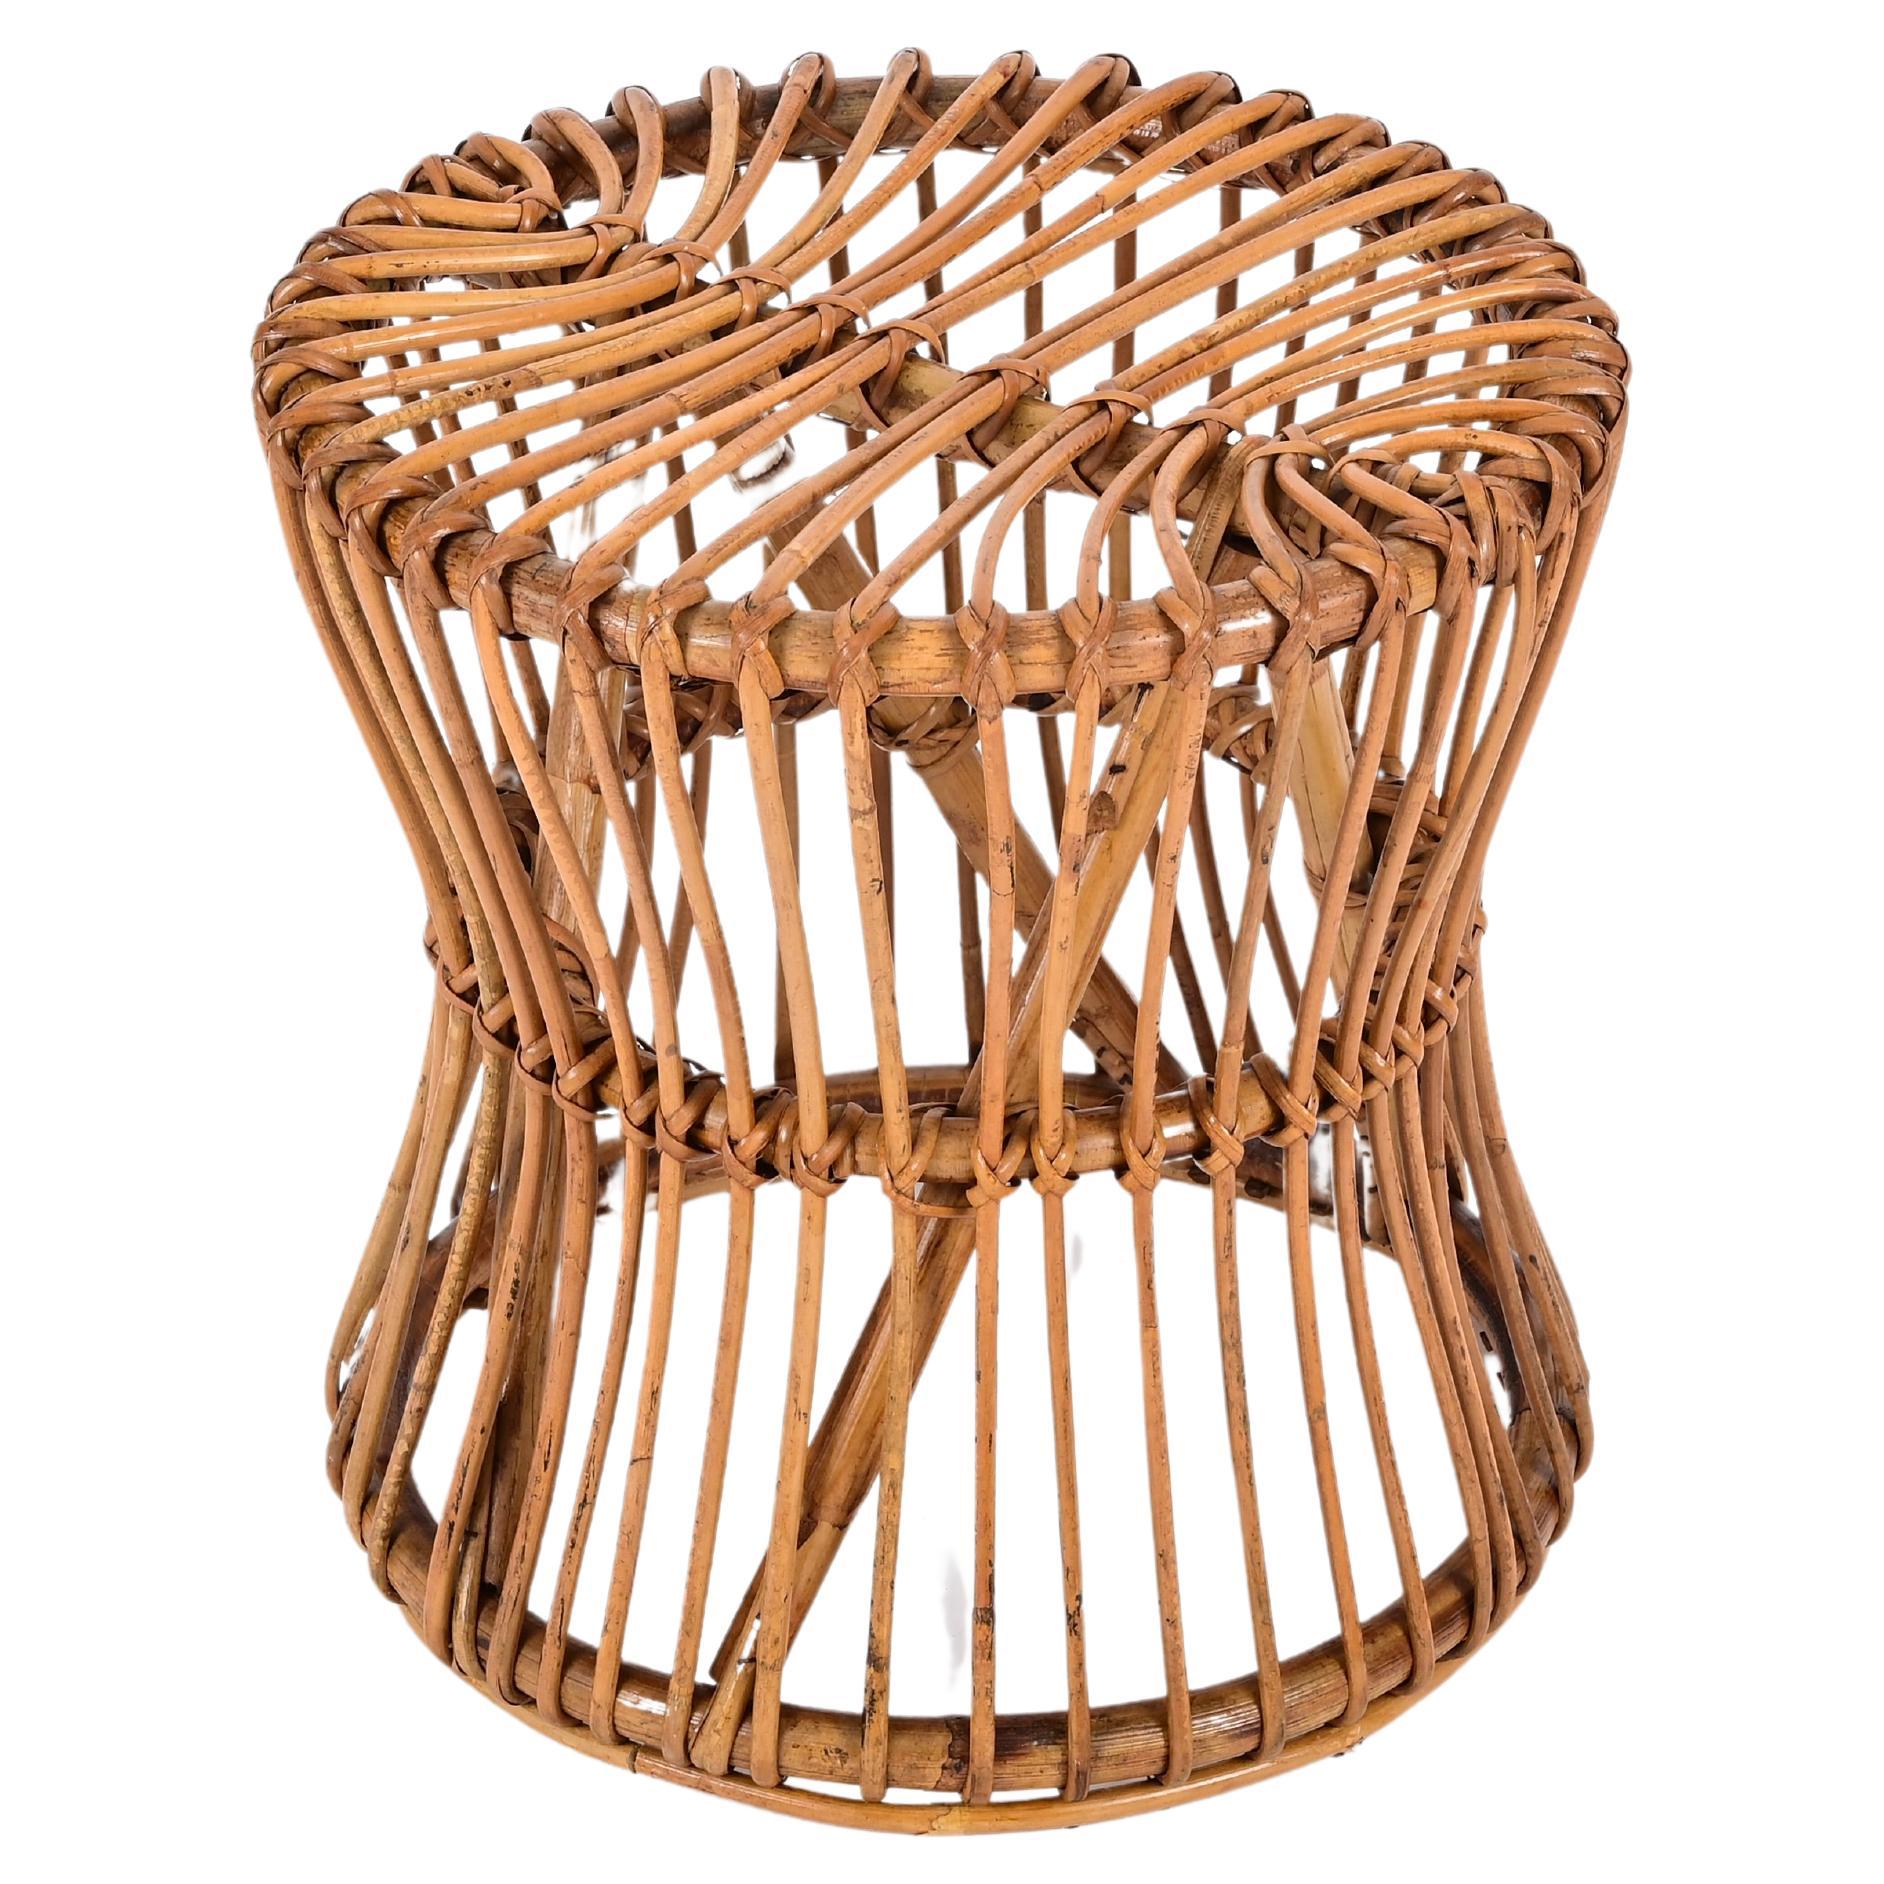 Midcentury French Riviera Pouf Stool in Rattan and Woven Wicker, Italy, 1960s For Sale